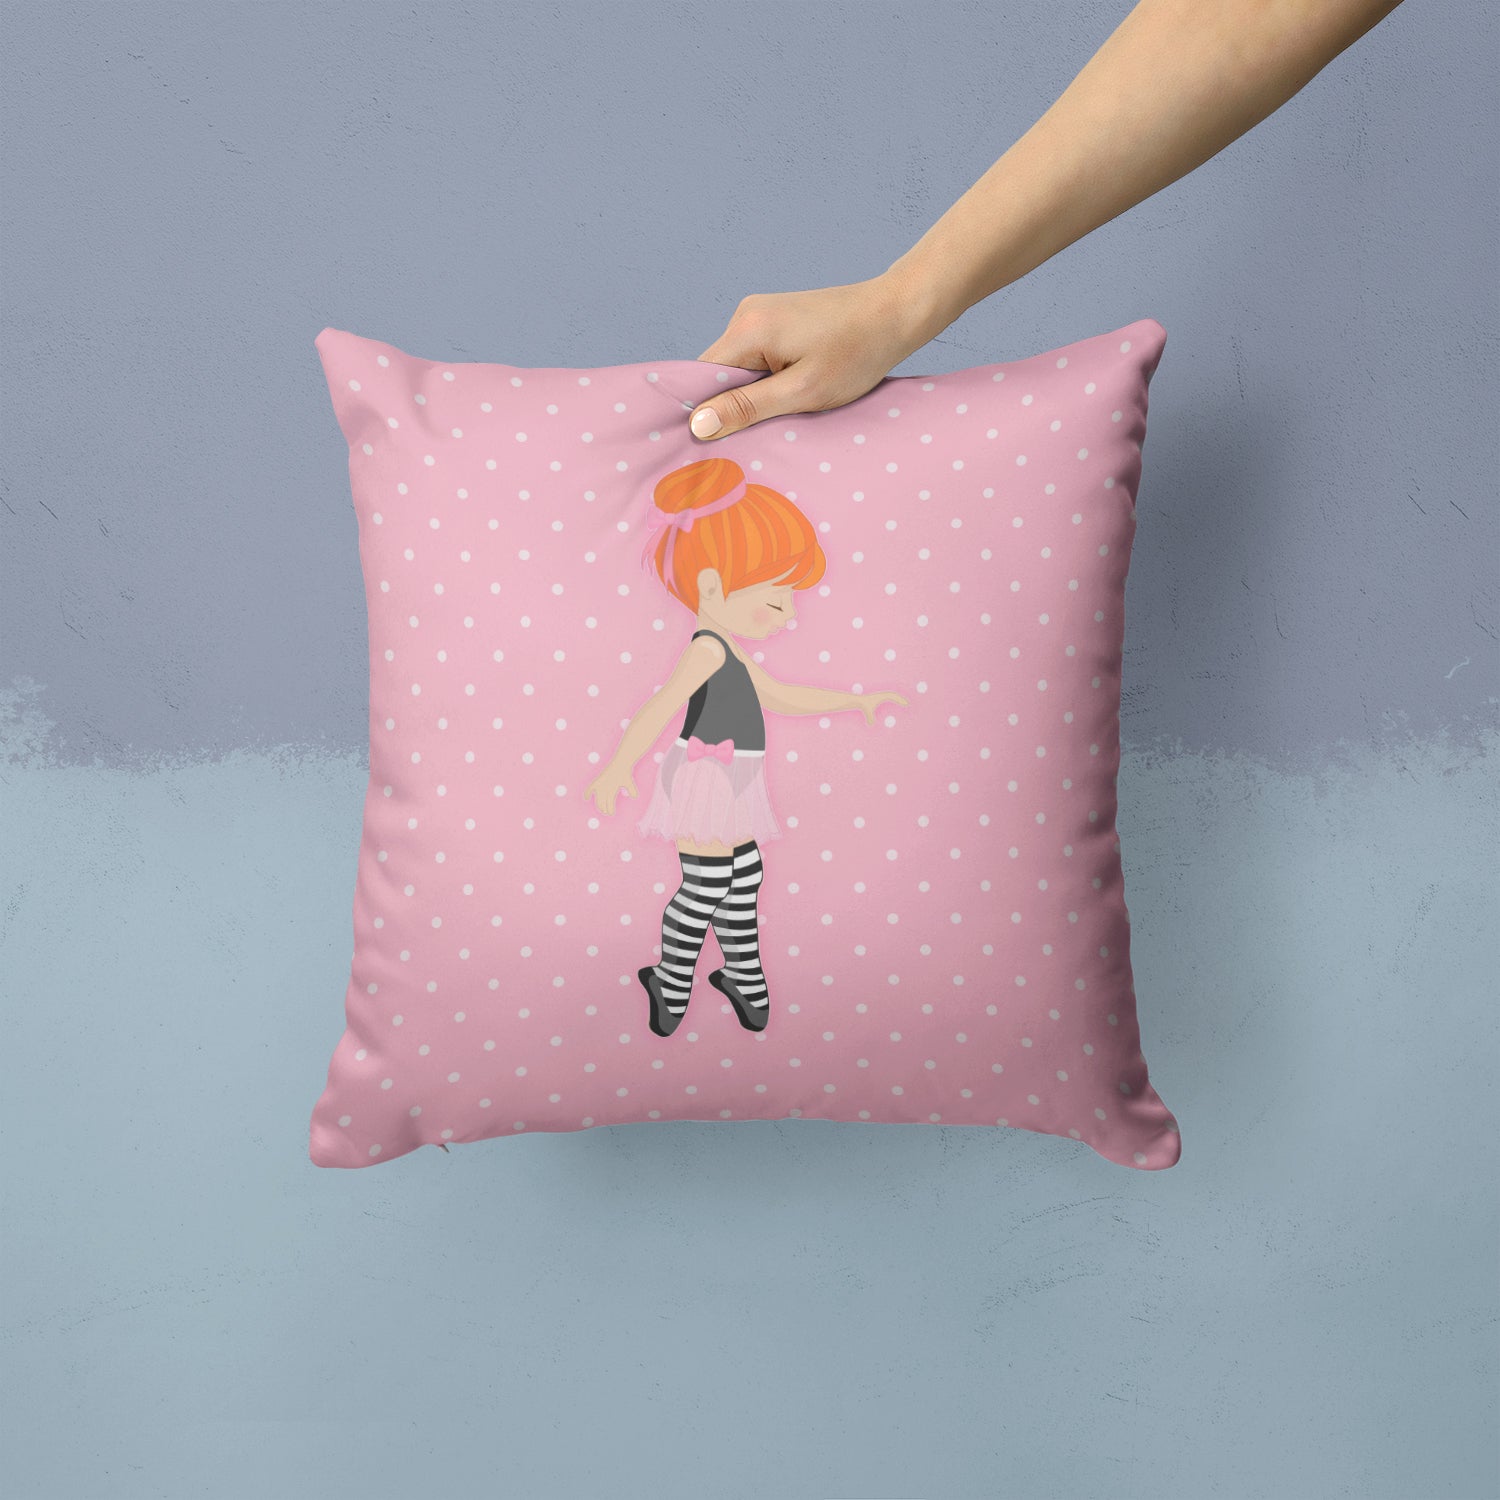 Ballerina Red Head Releve Fabric Decorative Pillow BB5168PW1414 - the-store.com